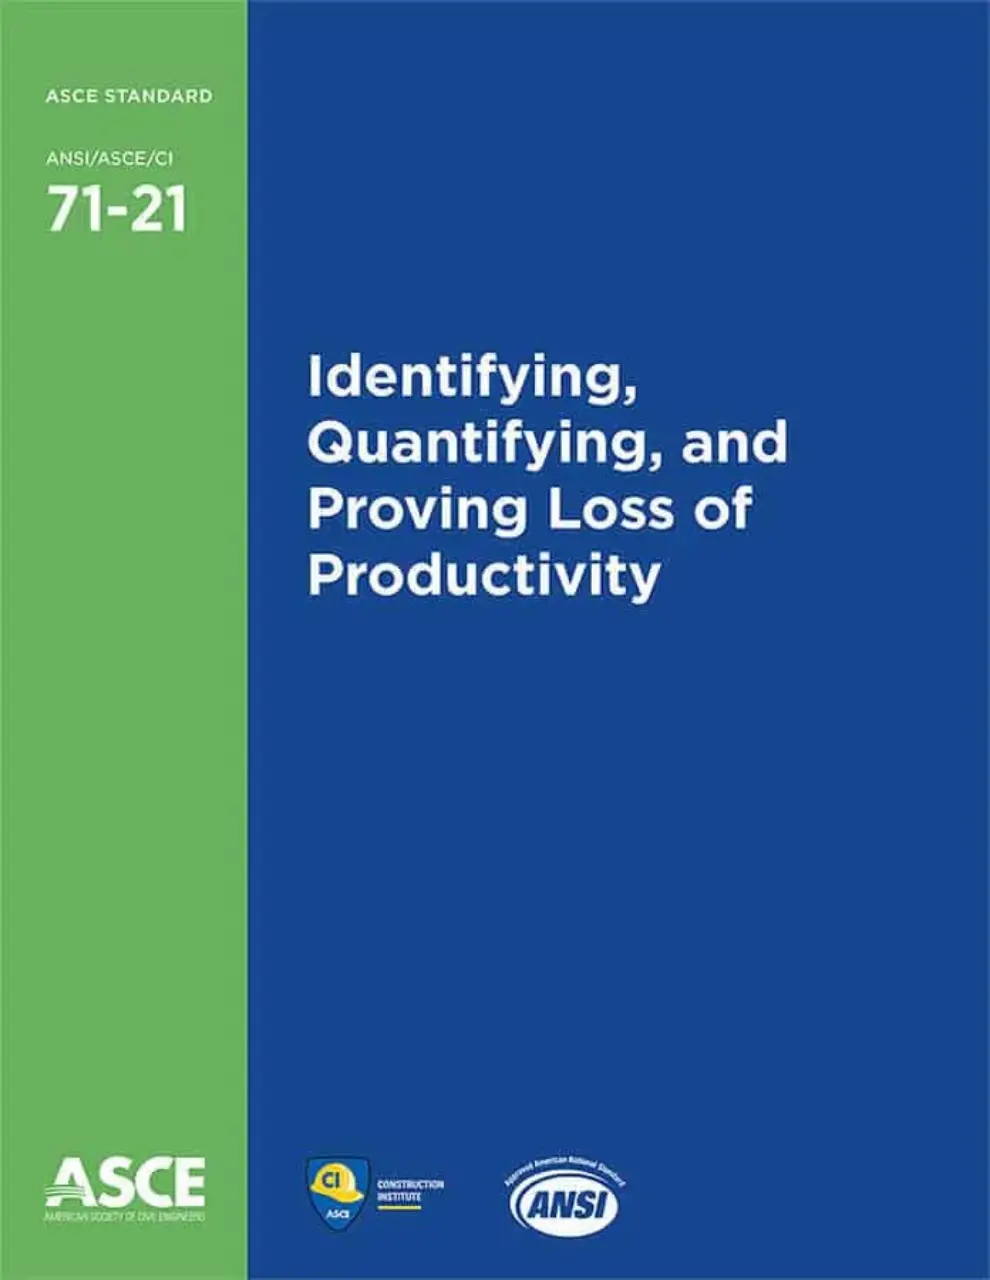 New ASCE Standard 71 Provides Guidance on Tracking and Measuring Labor Productivity